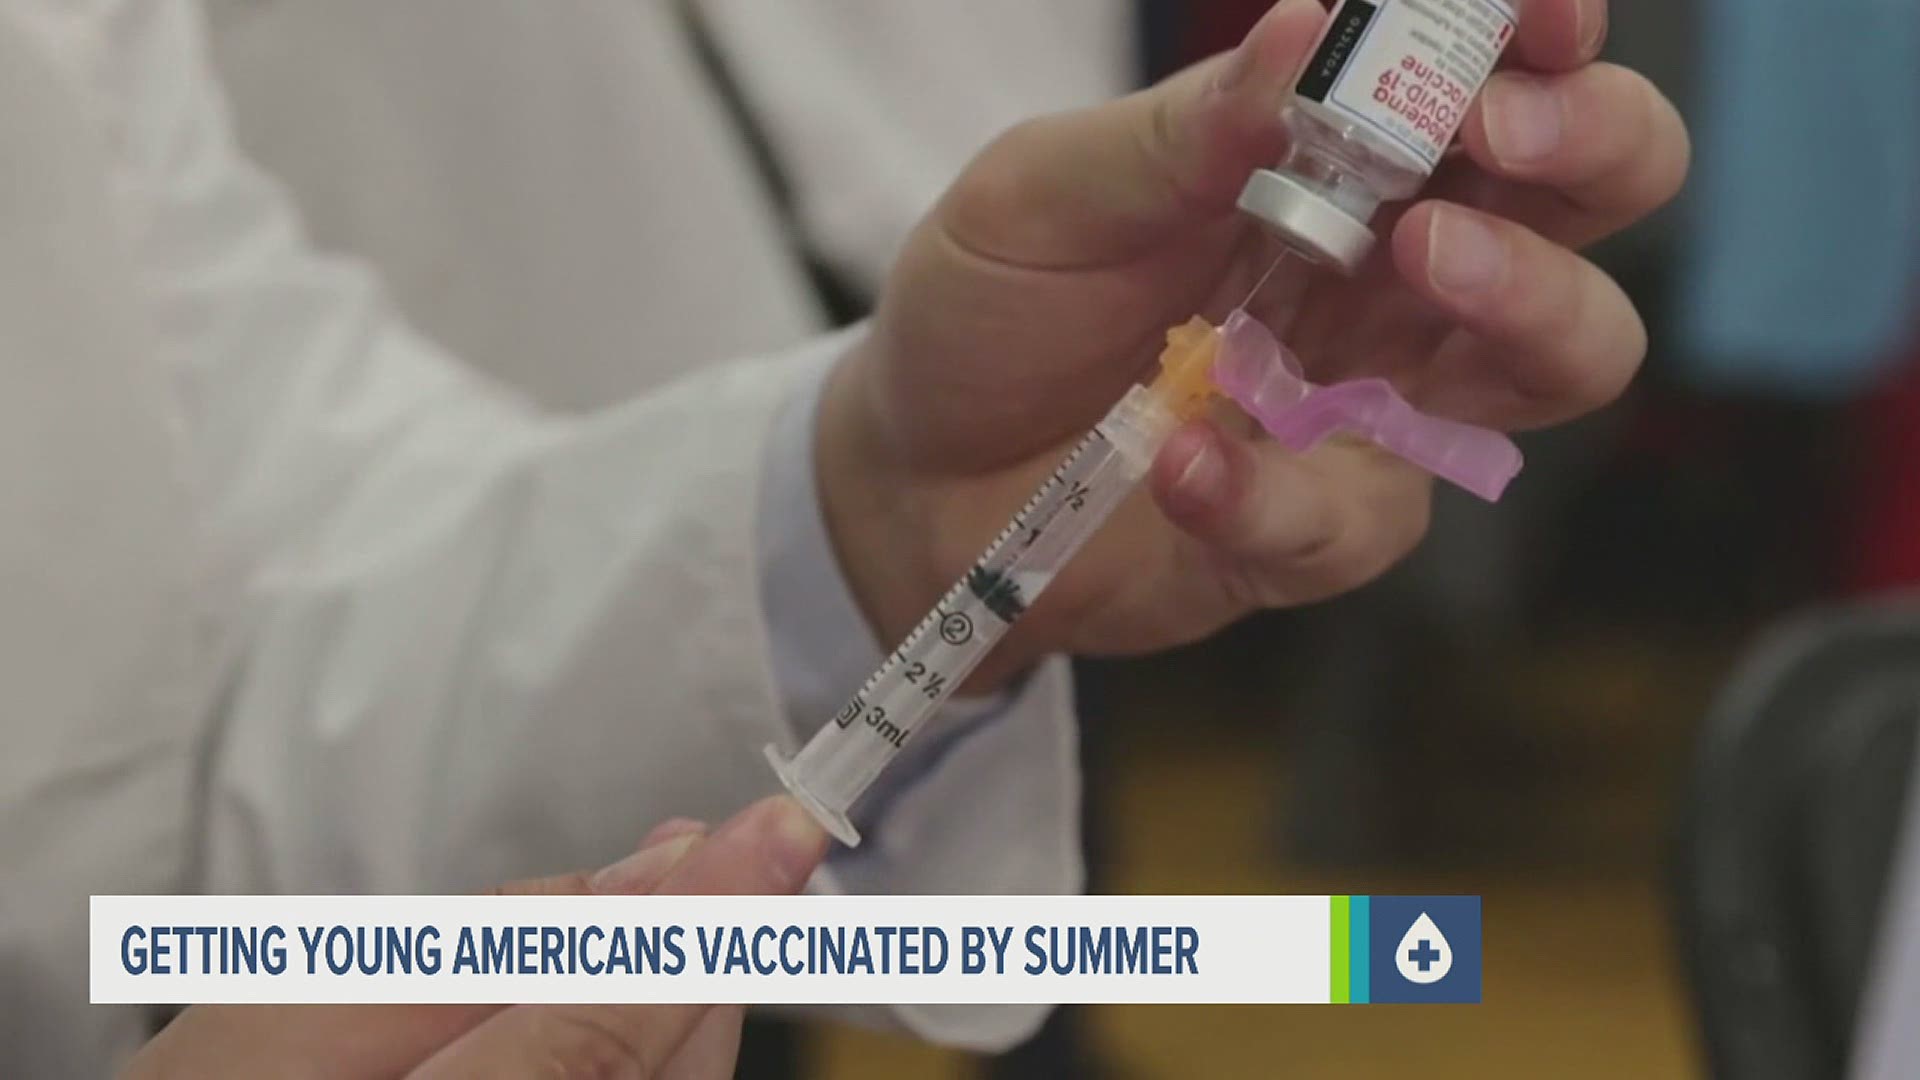 We're just a few weeks away from the start of summer, and as that day gets closer, getting teens and young Americans vaccinated has become a priority.